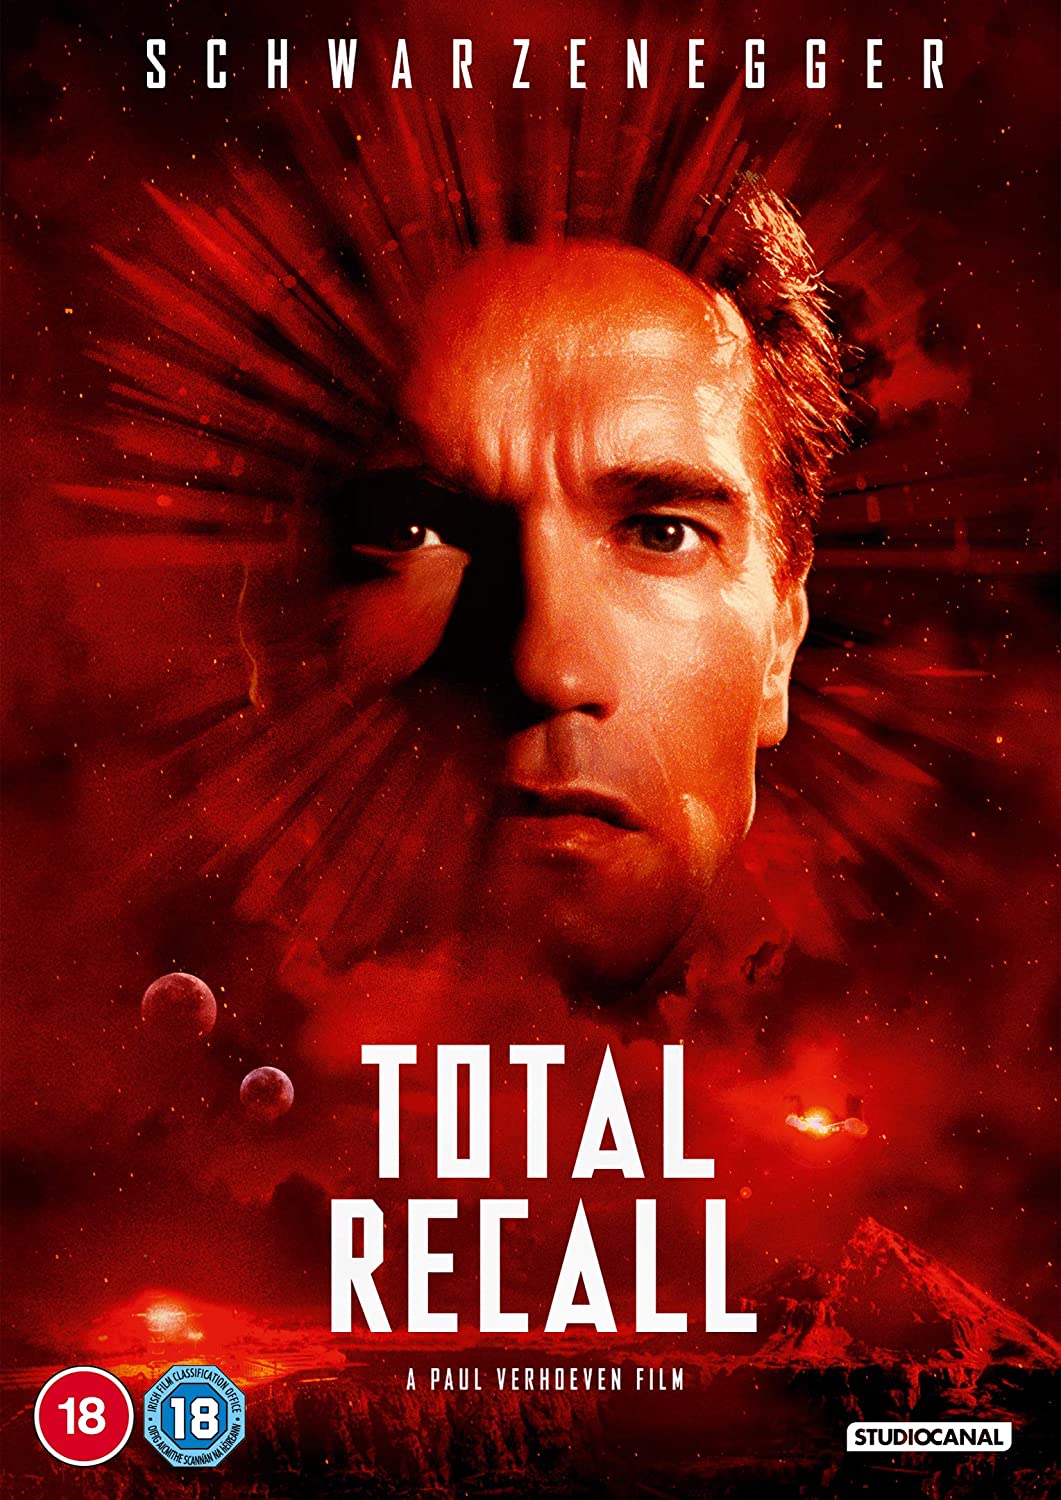 boom competitions -  win Total Recall on blu-ray